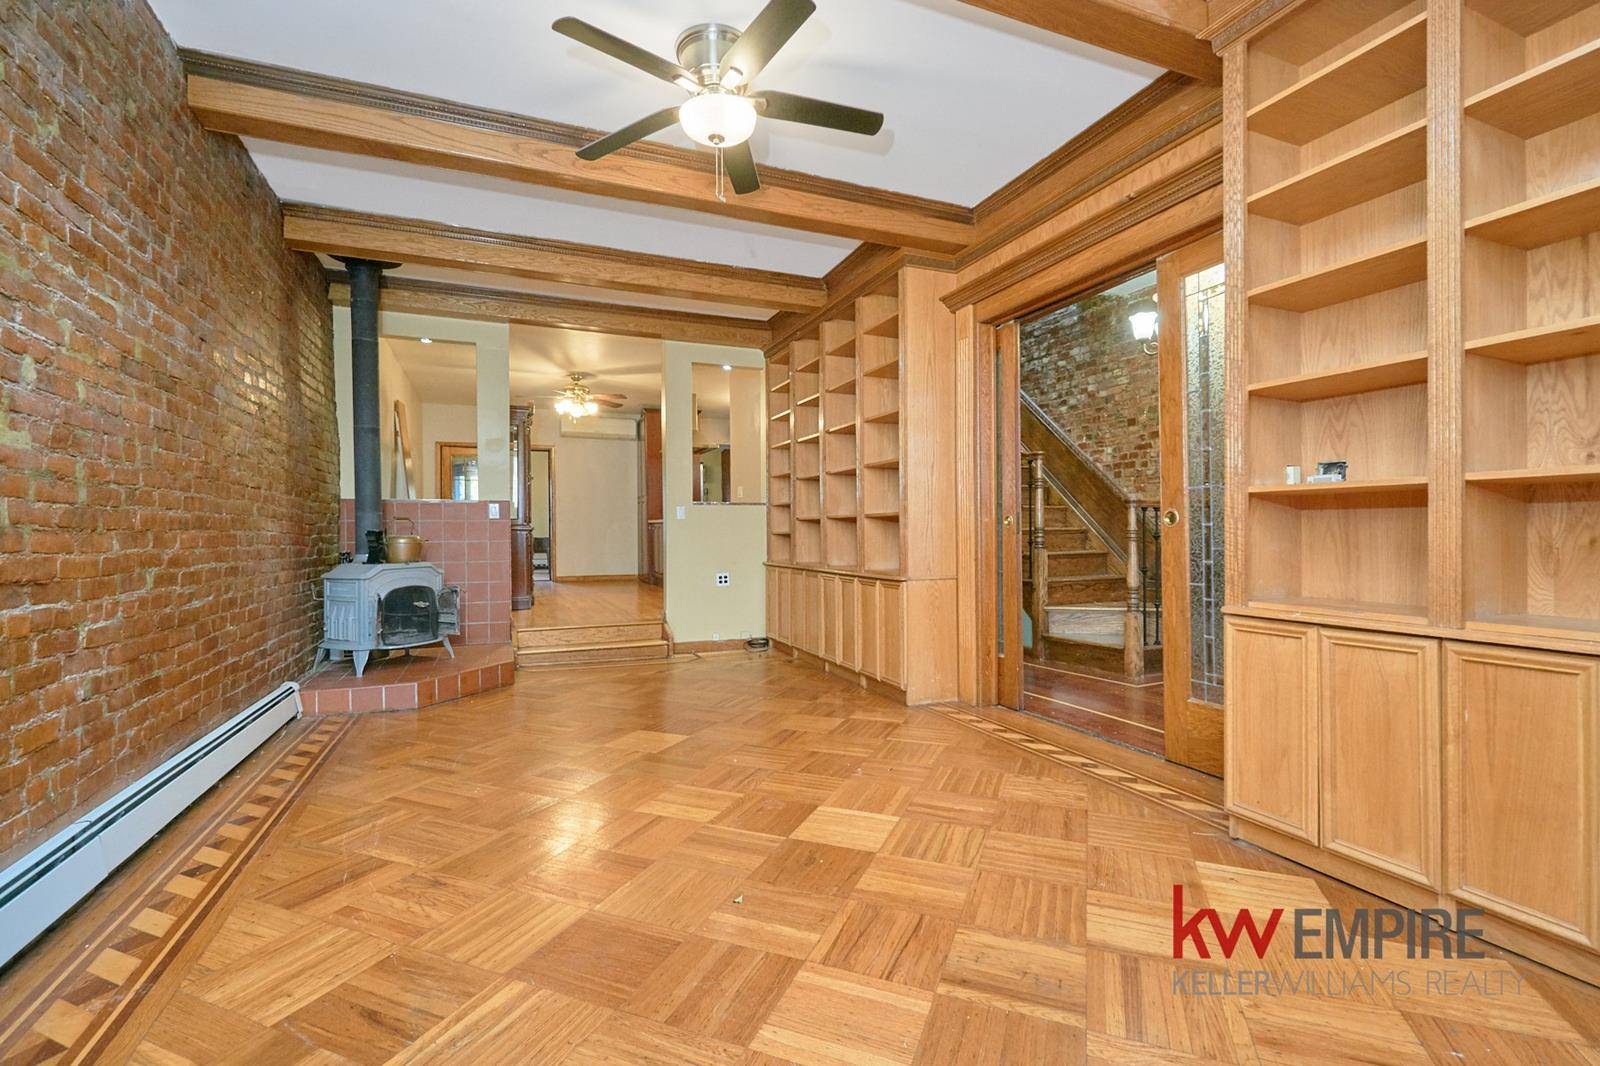 A charming Bay Ridge townhouse located on a quiet, tree lined street.